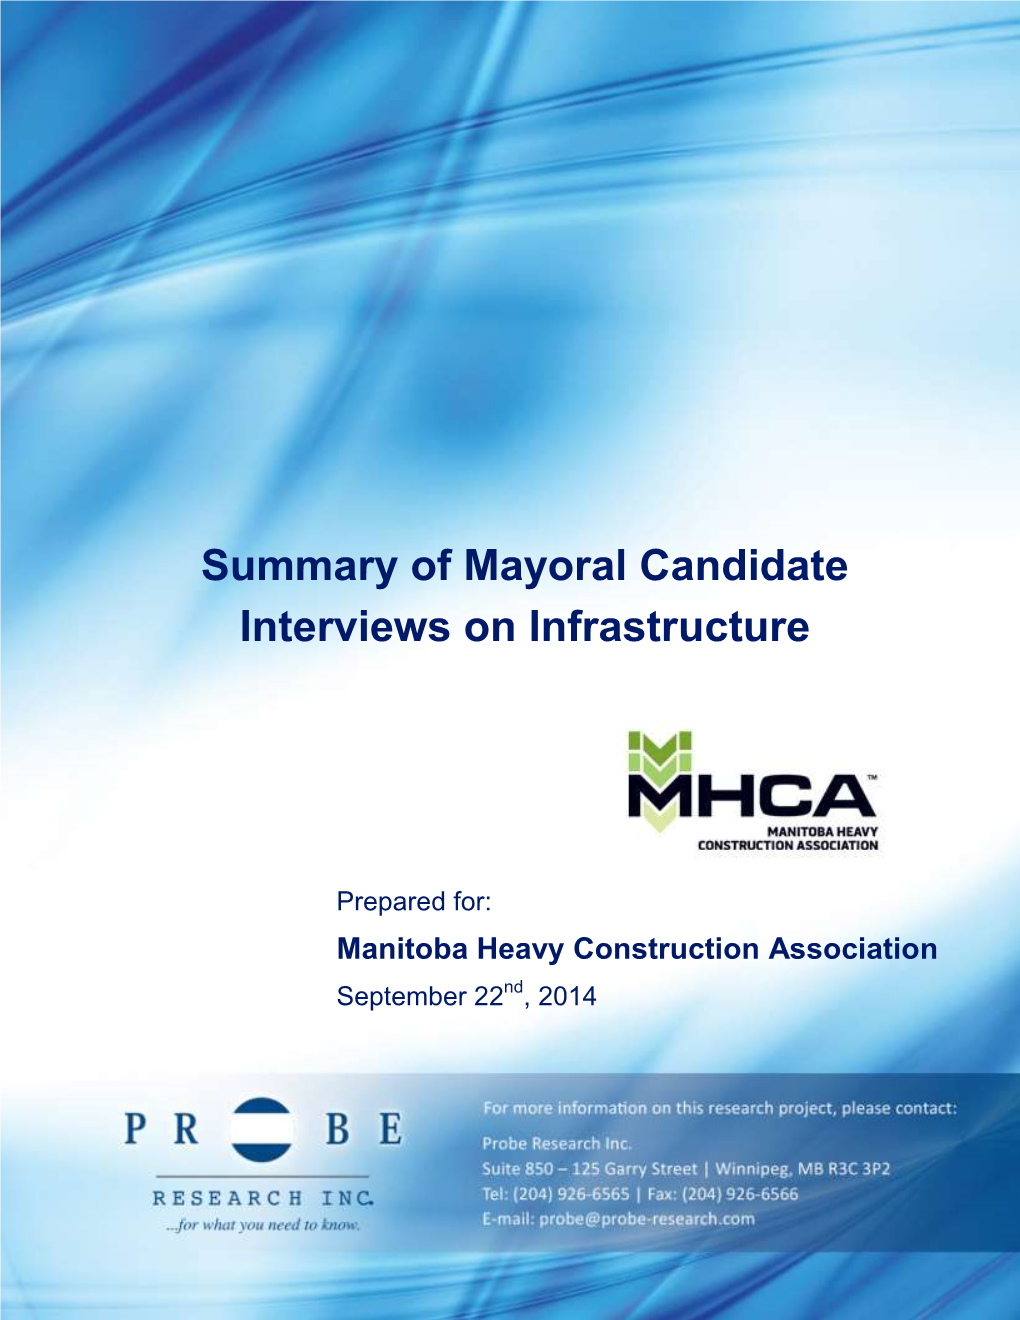 Summary of Mayoral Candidate Interviews on Infrastructure